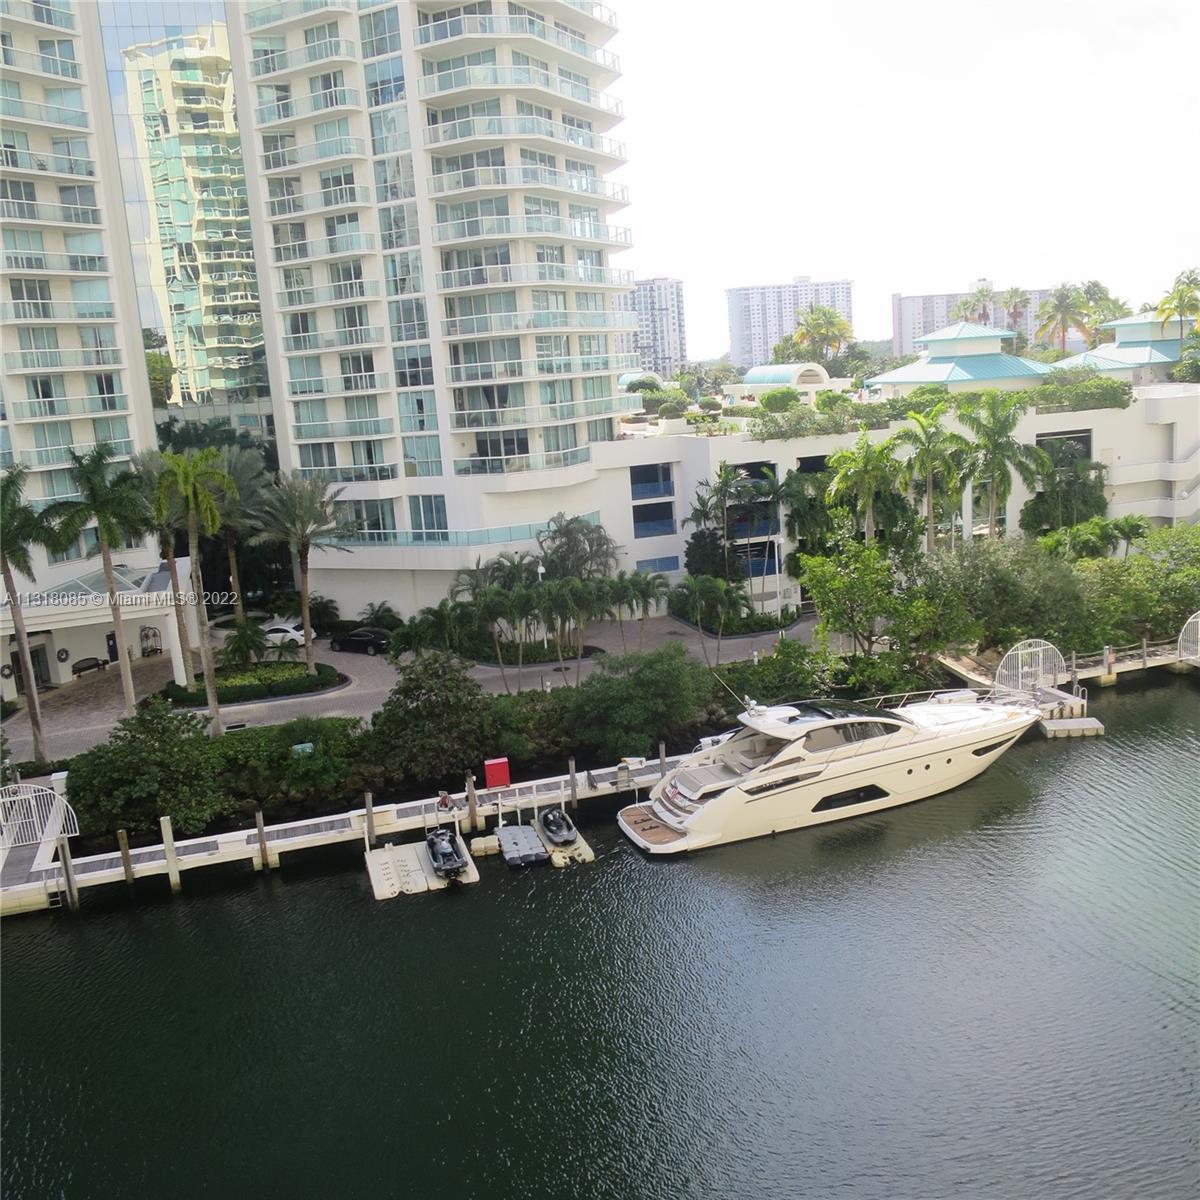 I’m Excited About This Property!  ….  Now Let Me Tell You Why! … Fantastic Water & Marina Views! 3/2